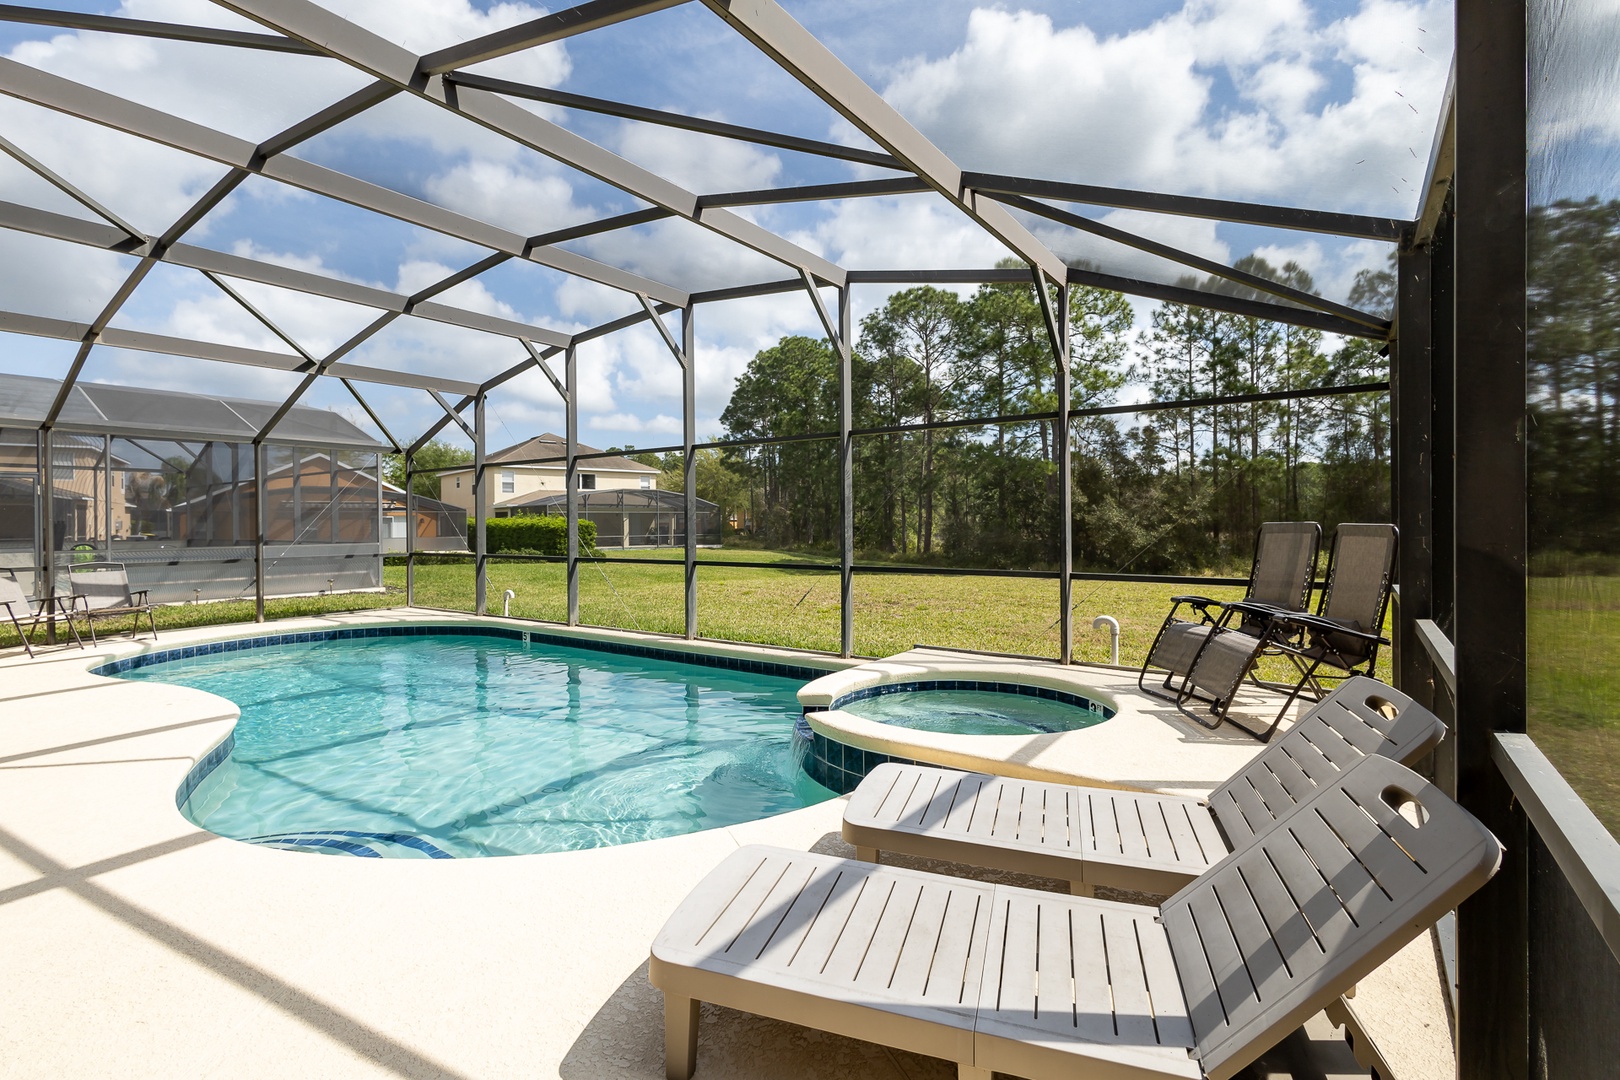 Lounge the day away or make a splash in your sparkling private pool